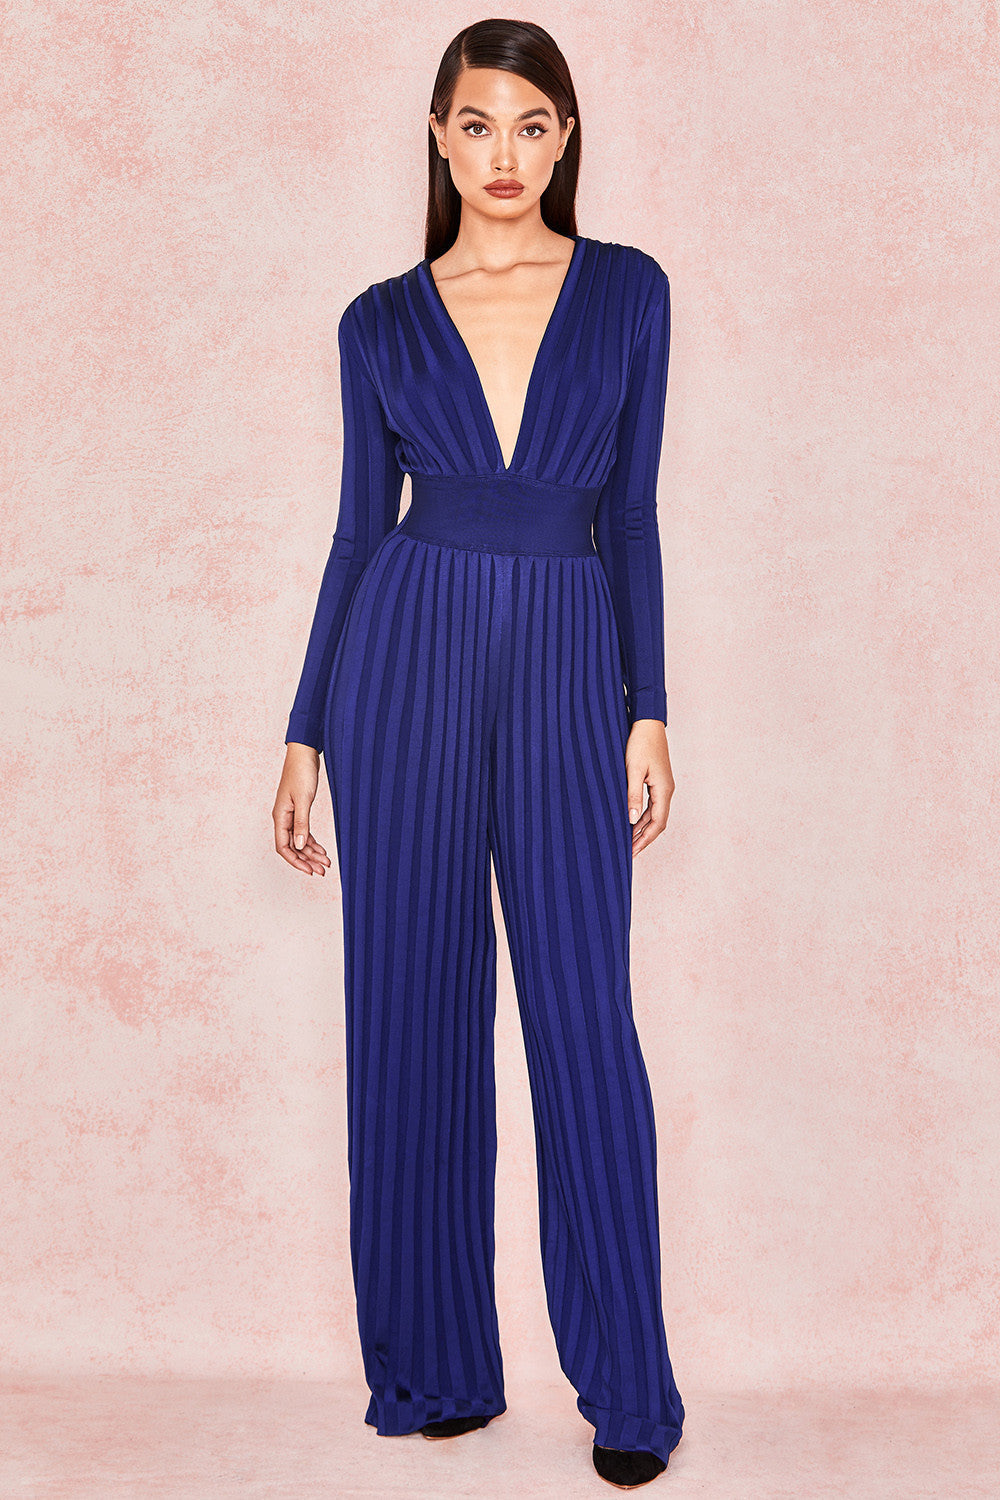 Classy Solid Color Jumpsuit GlamzLife